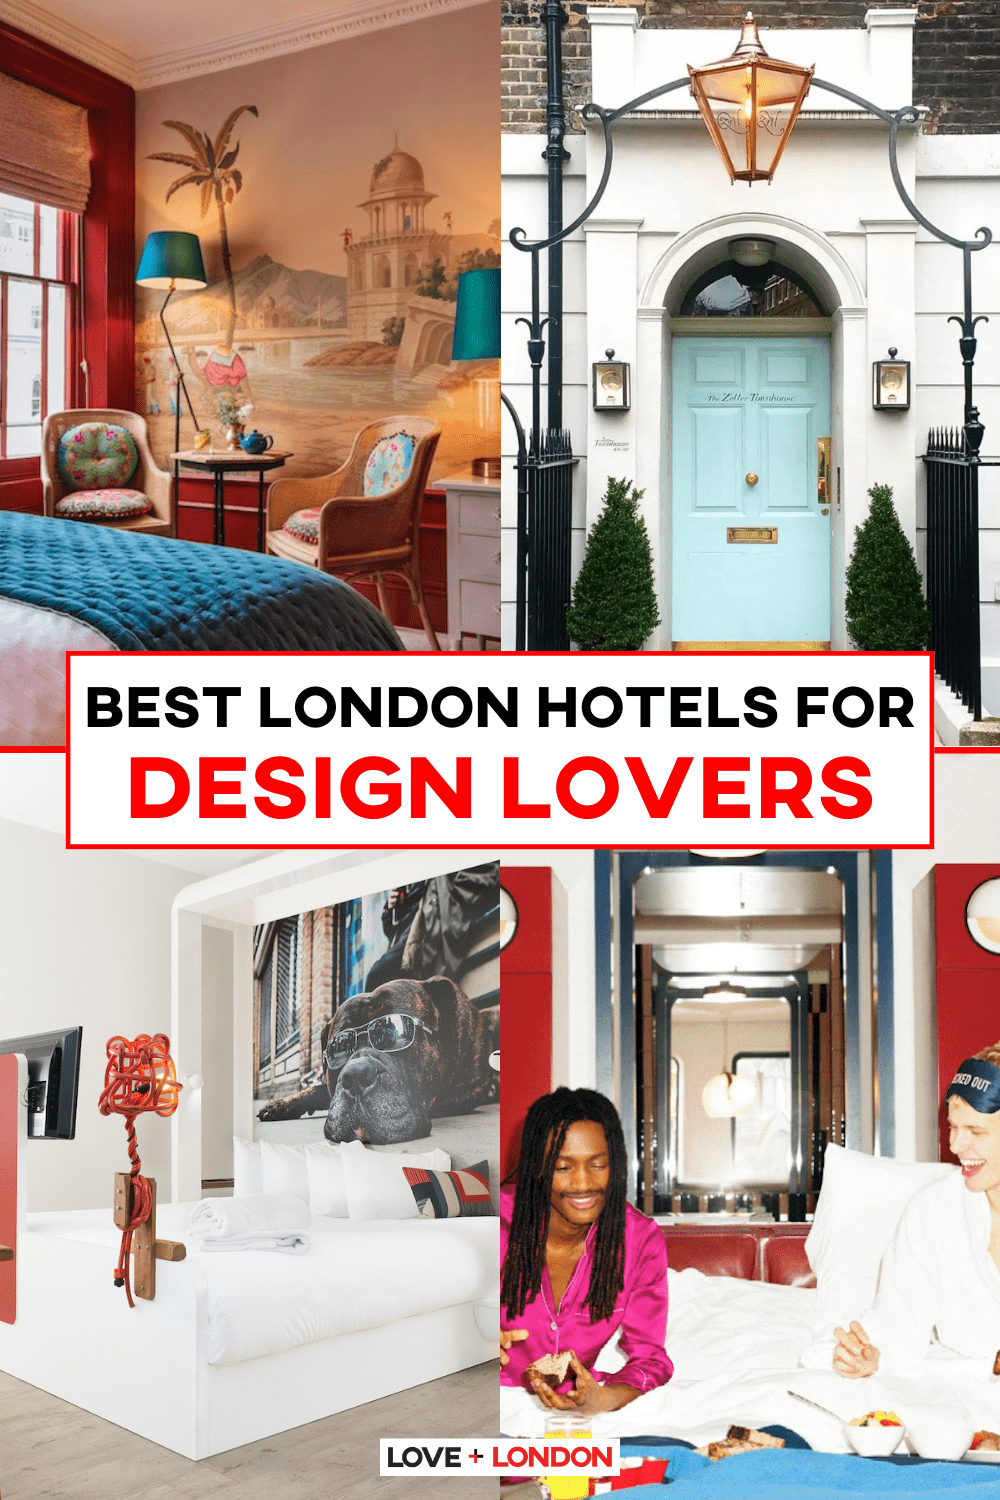 This is a Pinterest Pin from Love and London on the Best London Hotels for Design Lovers